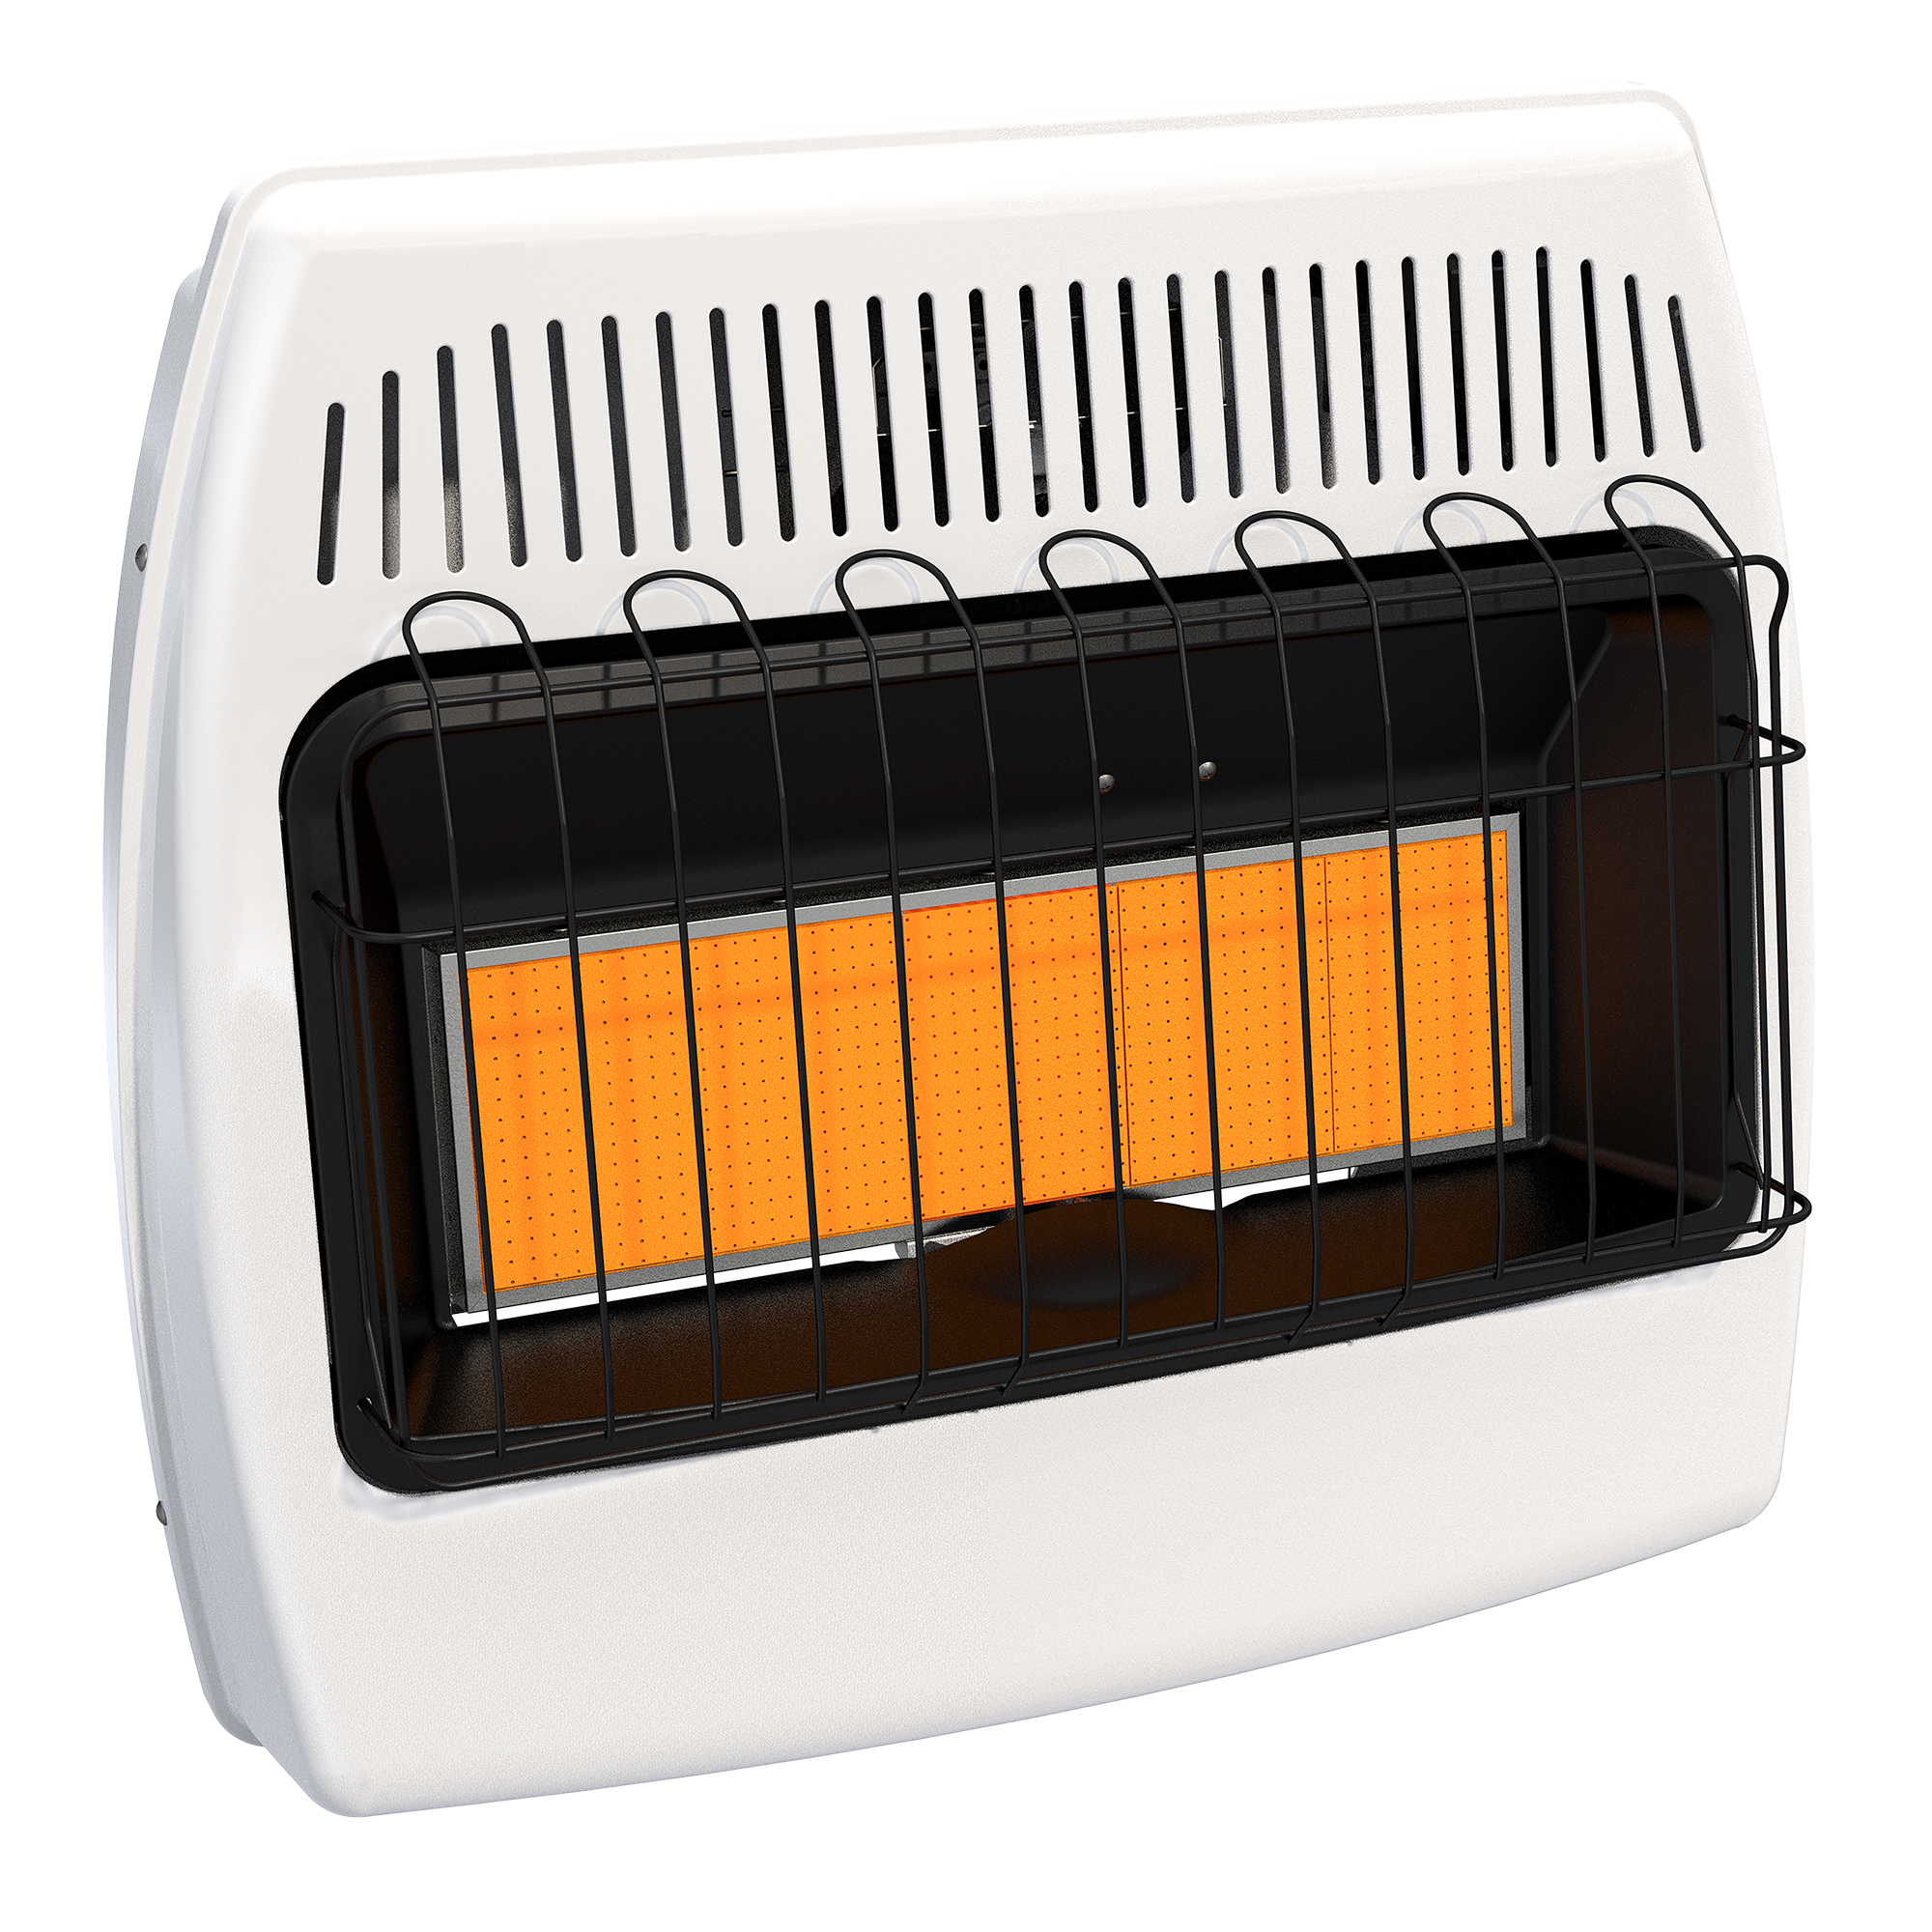 30K BTU NG Infrared Vent Free Wall Heater, Heat Output 30000 Btu/hour, Heating Capability 1000 ft², Fuel Type Natural Gas, Model - Dyna Glo IR30NMDG-1